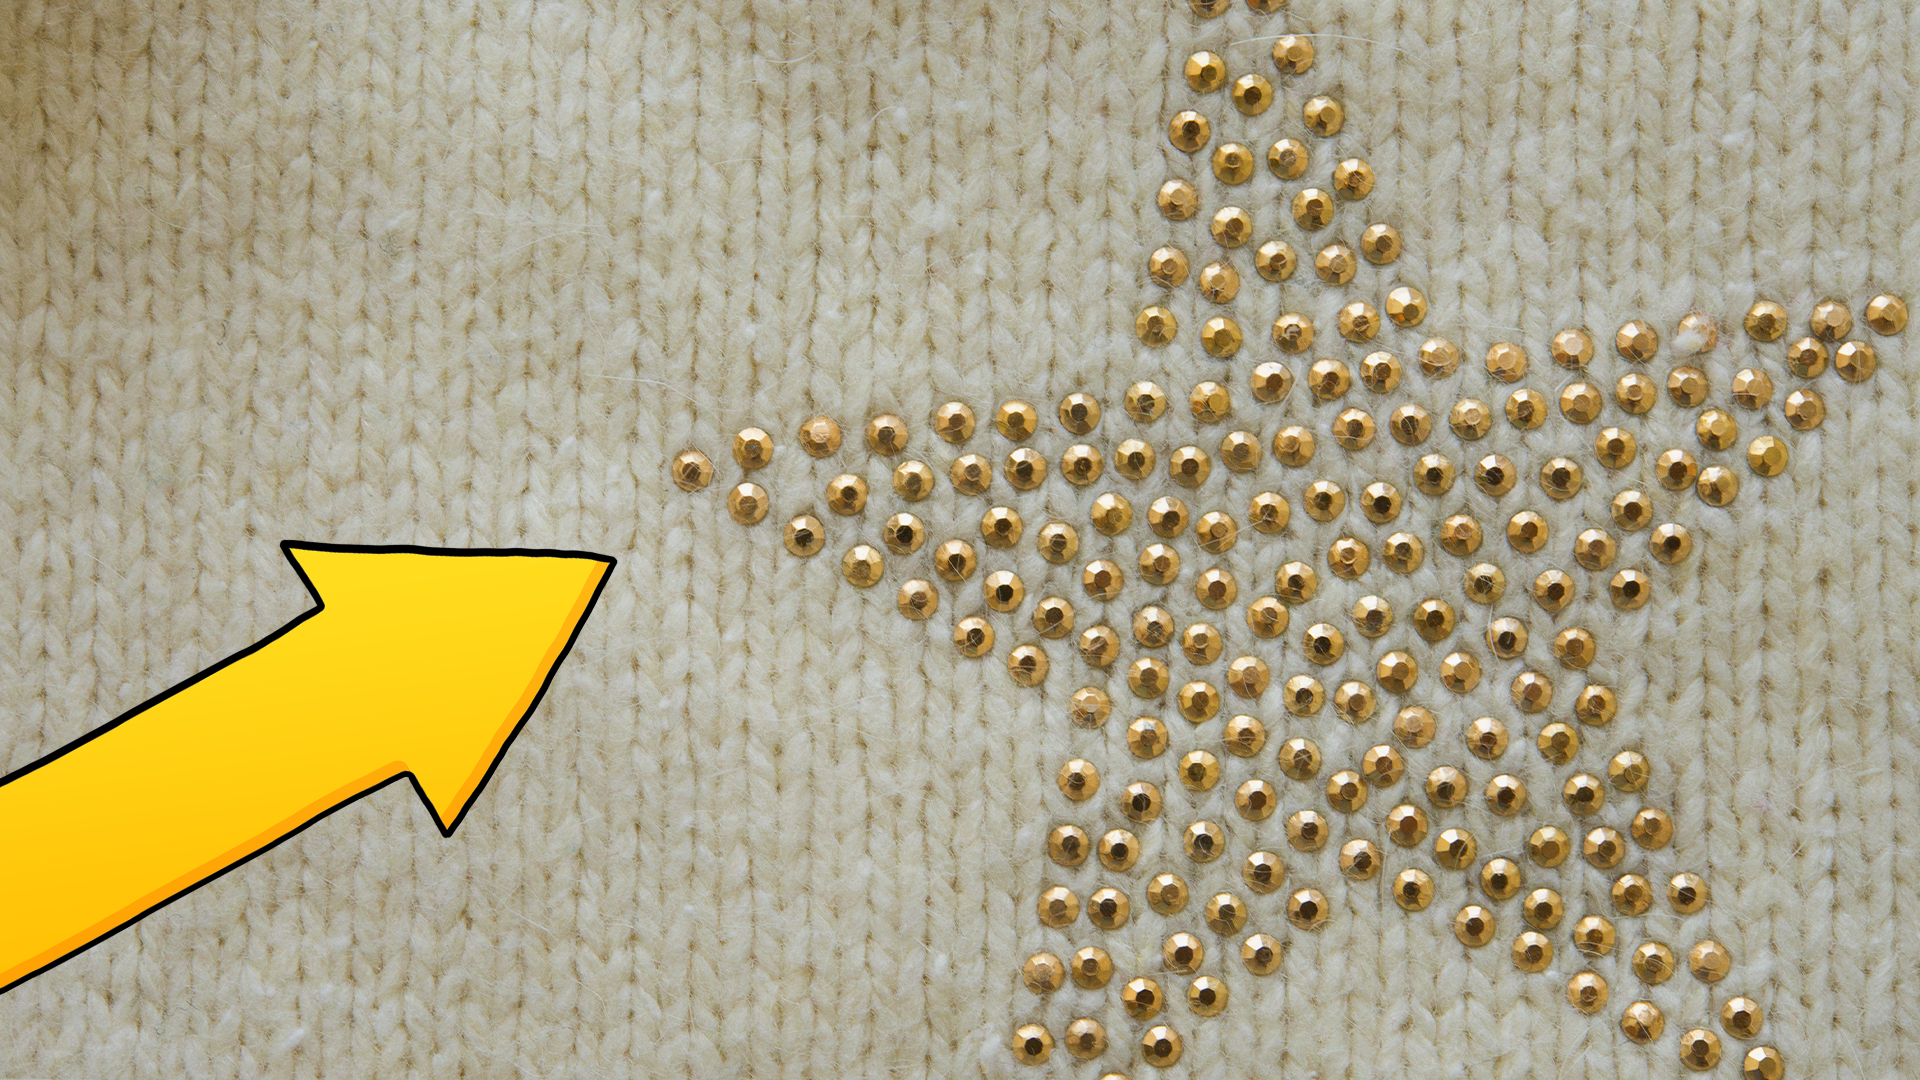 Gold star on knitted background and arrow